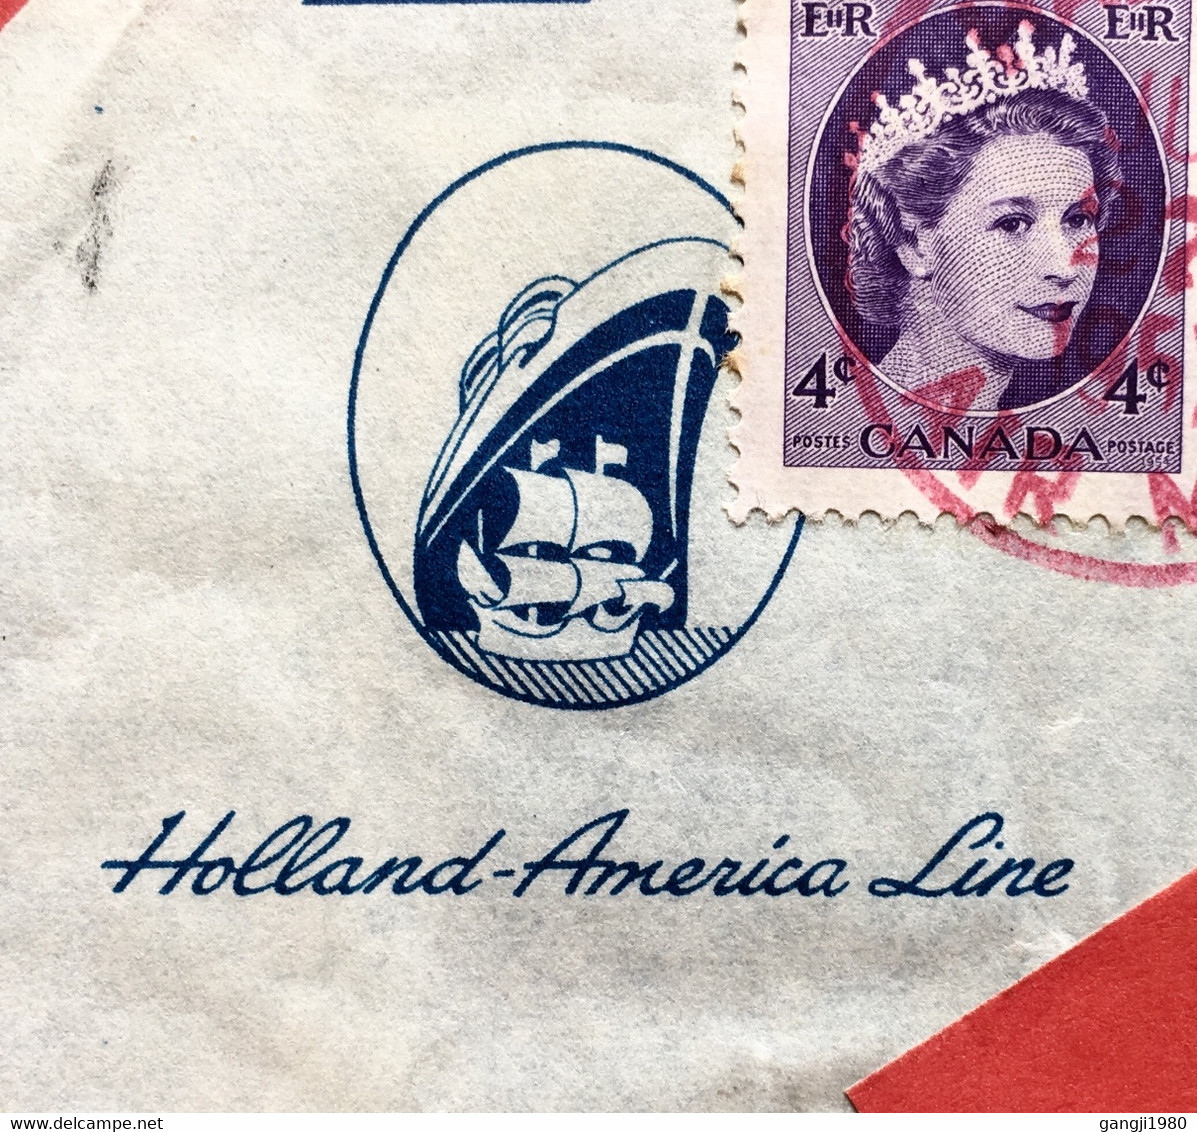 CANADA TO USA USED COVER 1957, VIGNETTE “SPECIAL DELIVERY EXPRESS” 1955 PRINT “HOLLAND-AMERICA LINE” HALIFEX RED CANCEL. - Poste Aérienne: Exprès